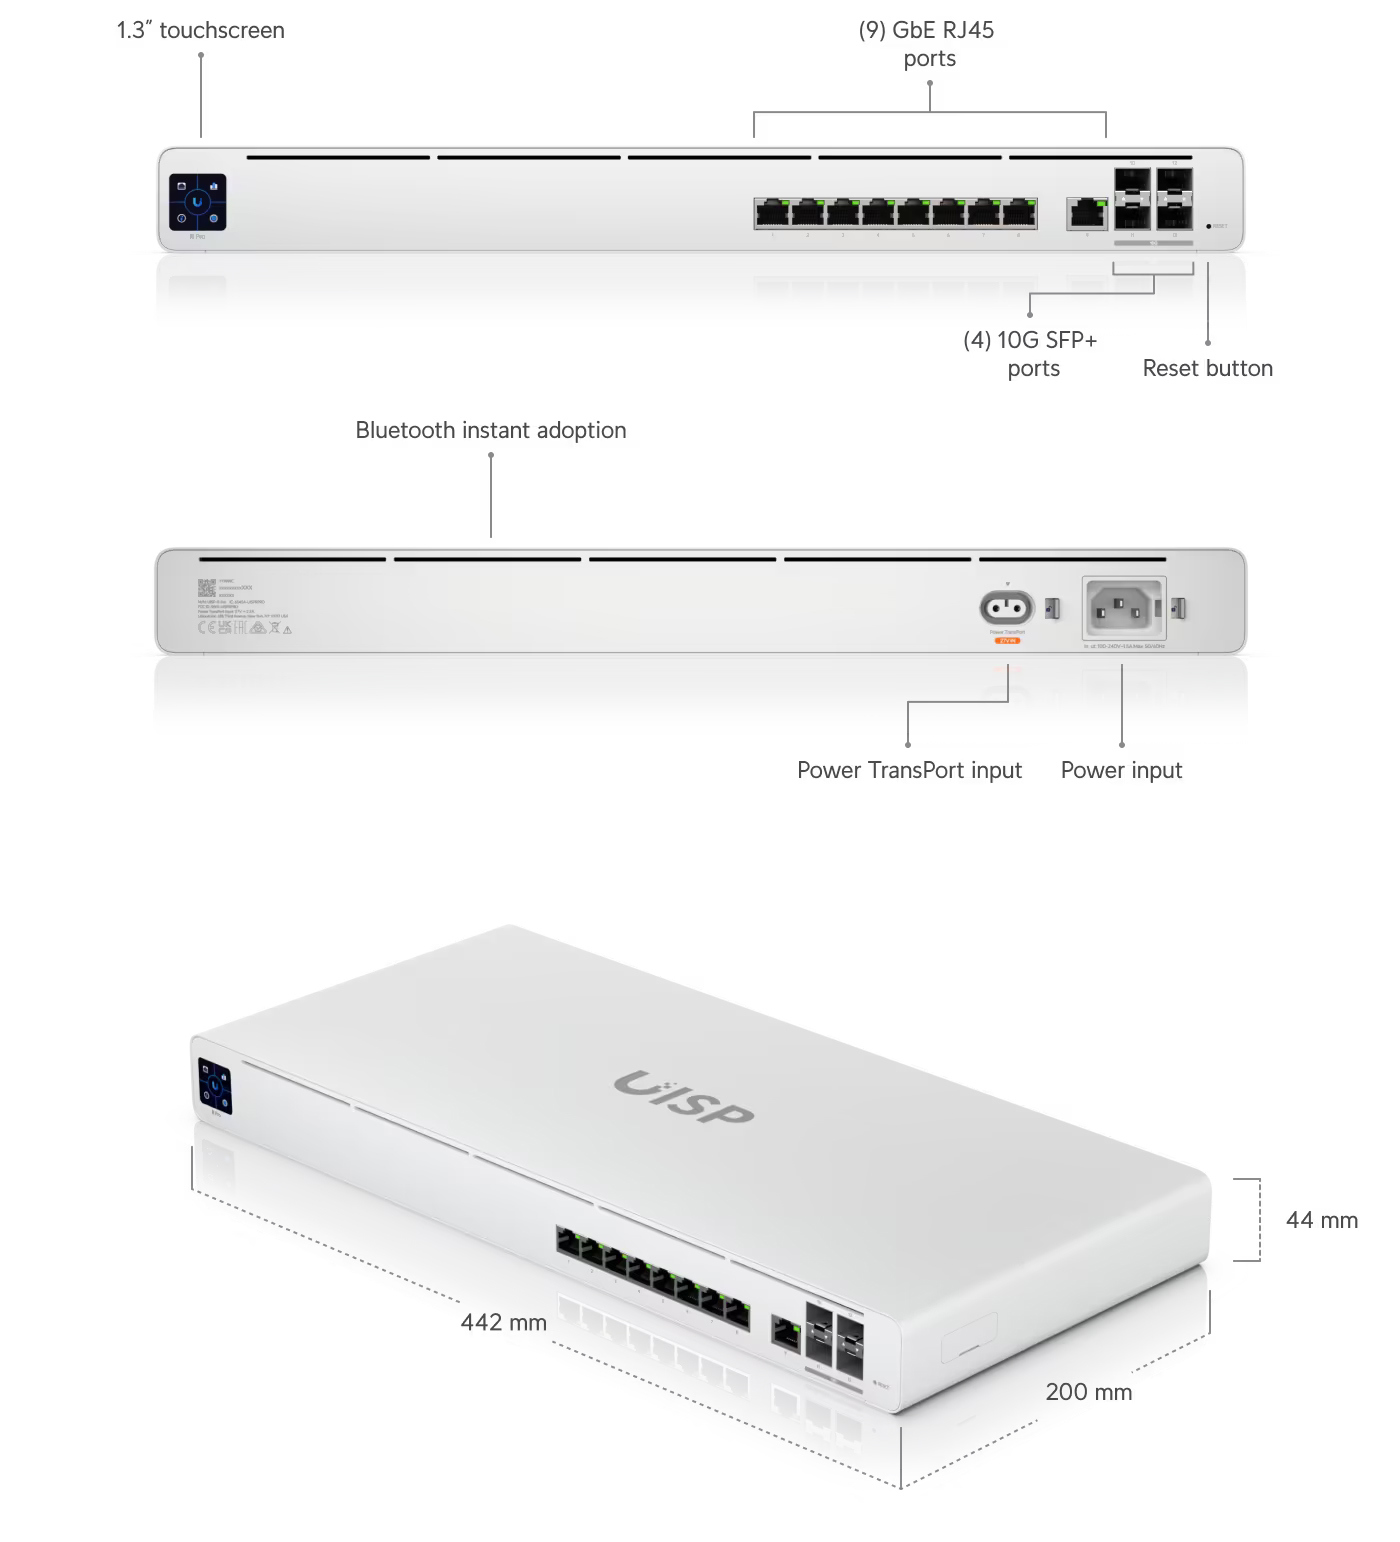 Networking-Accessories-Ubiquiti-UISP-Router-Pro-9-Port-Gigabit-Ethernet-RJ45-Router-with-4-Port-10G-SFP-designed-for-ISP-application-UISP-R-Pro-1